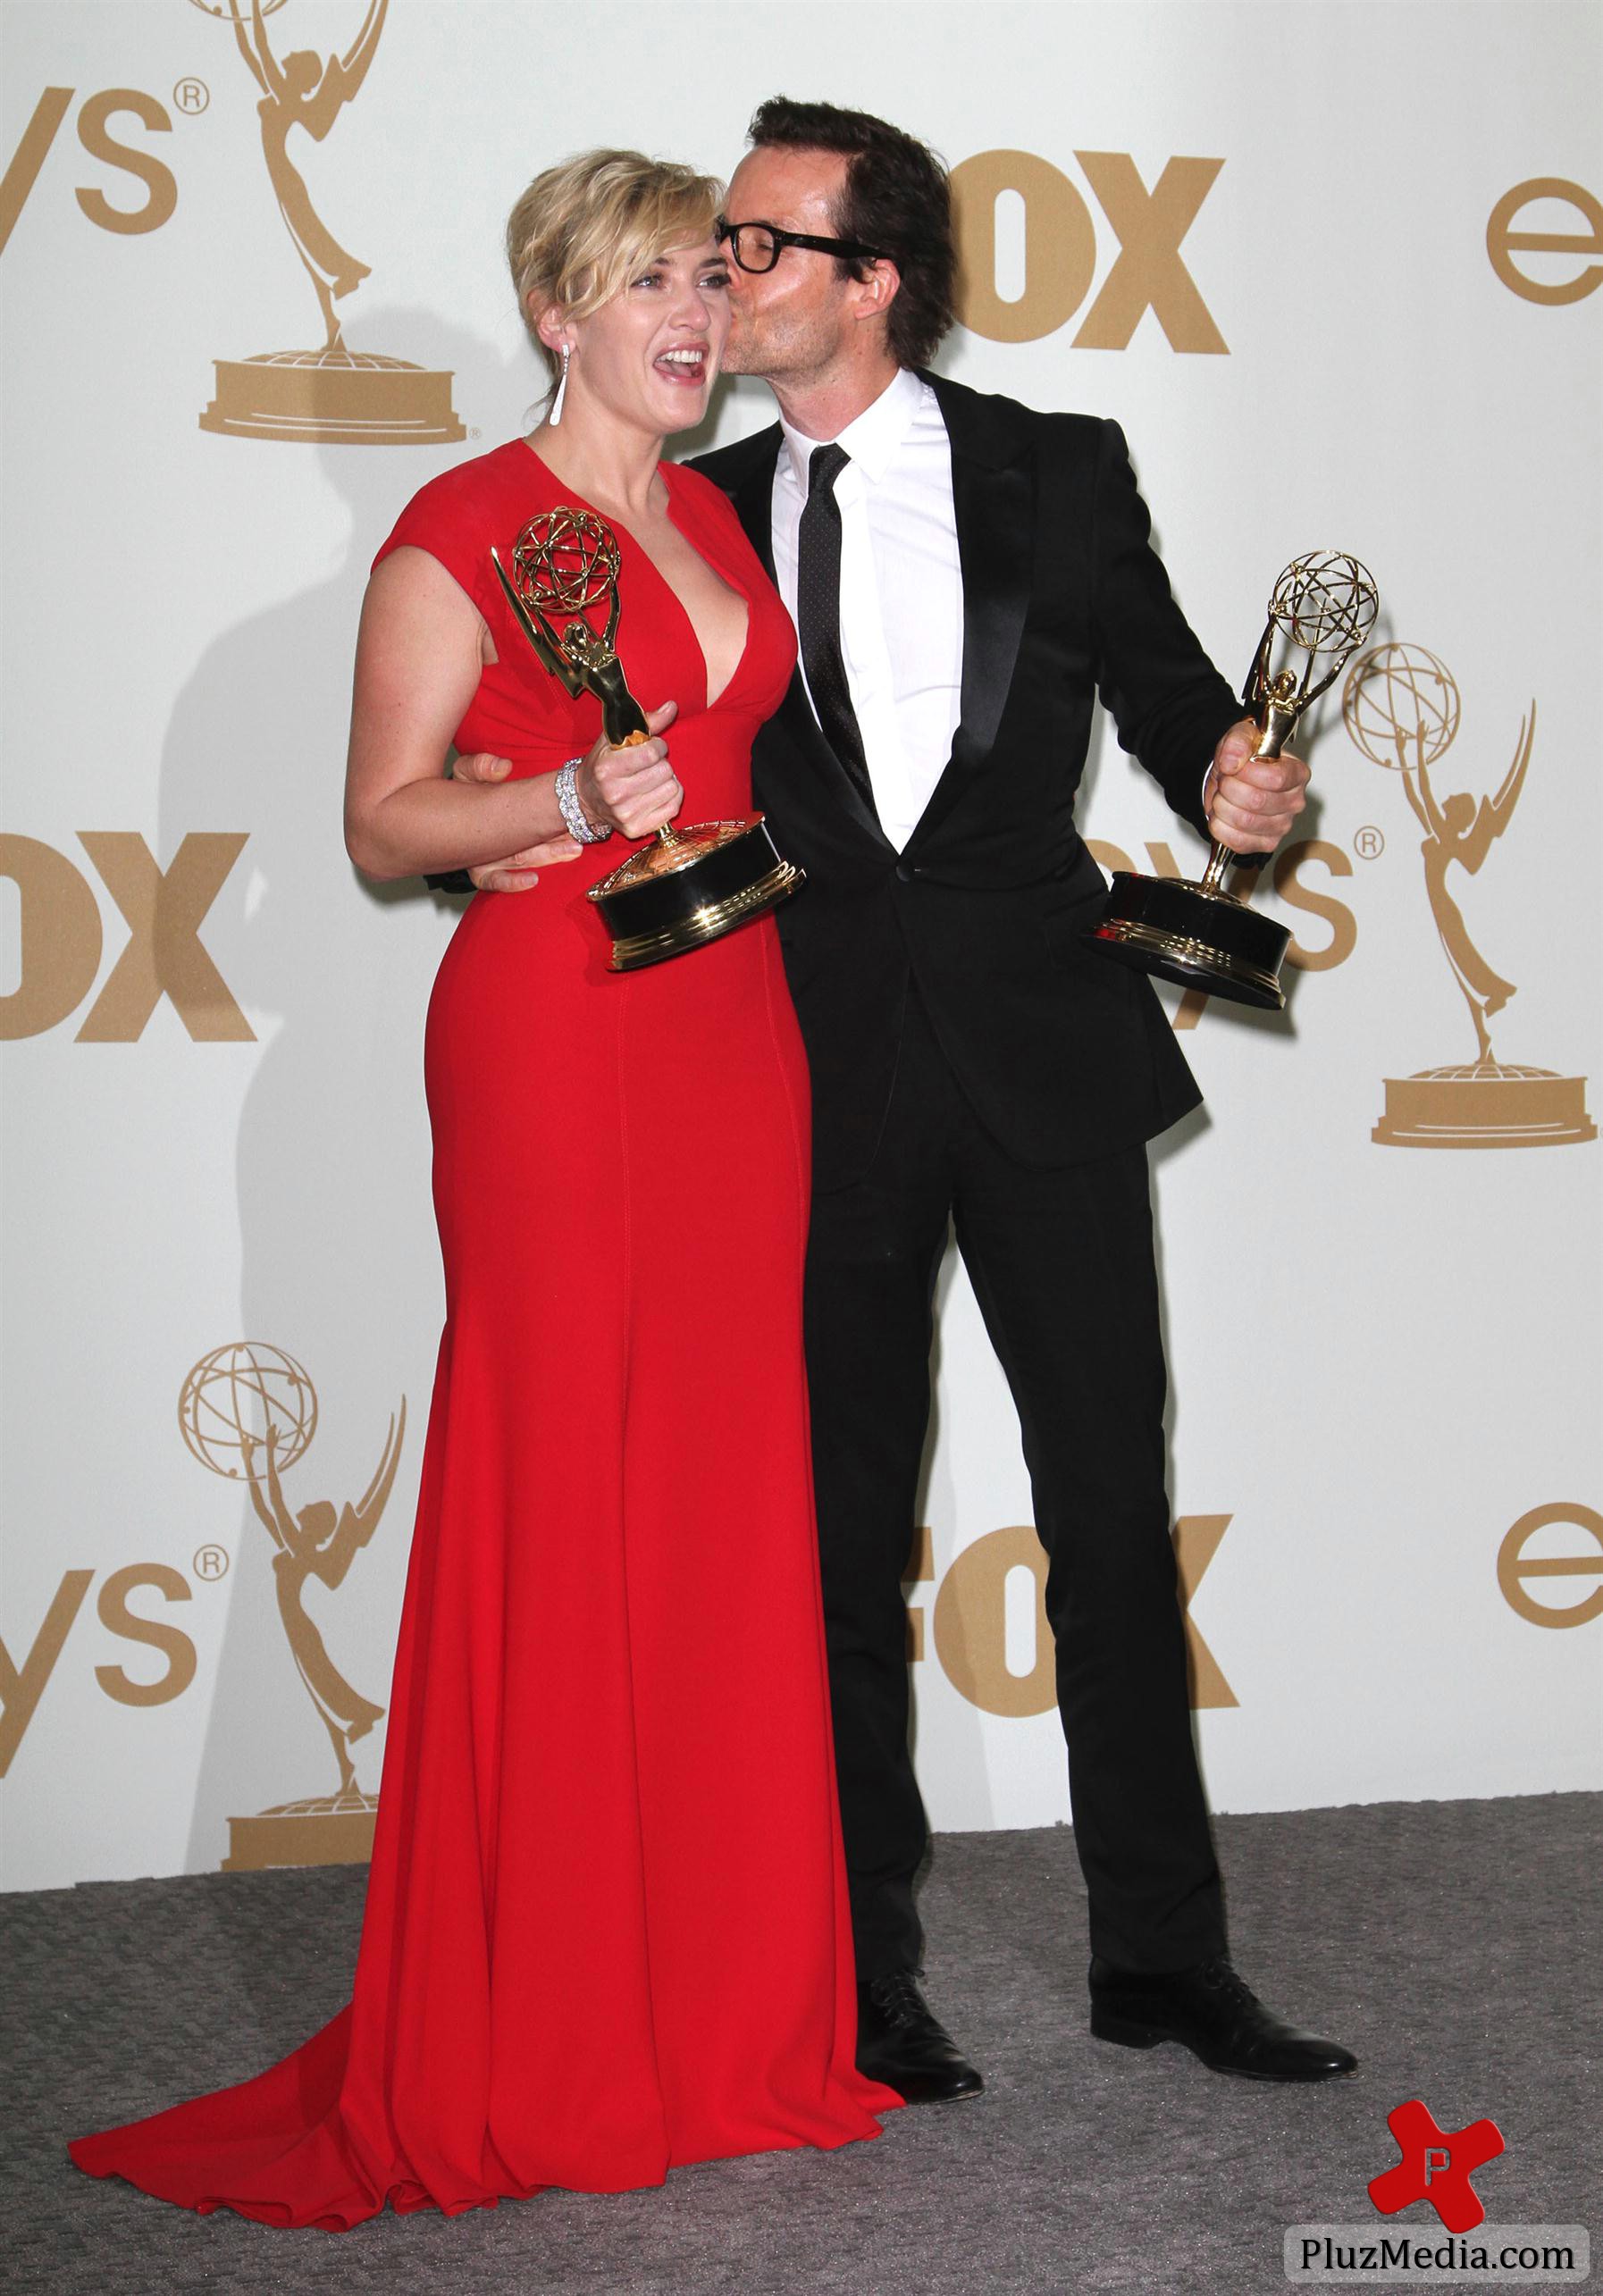 63rd Primetime Emmy Awards held at the Nokia Theater LA LIVE photos | Picture 81250